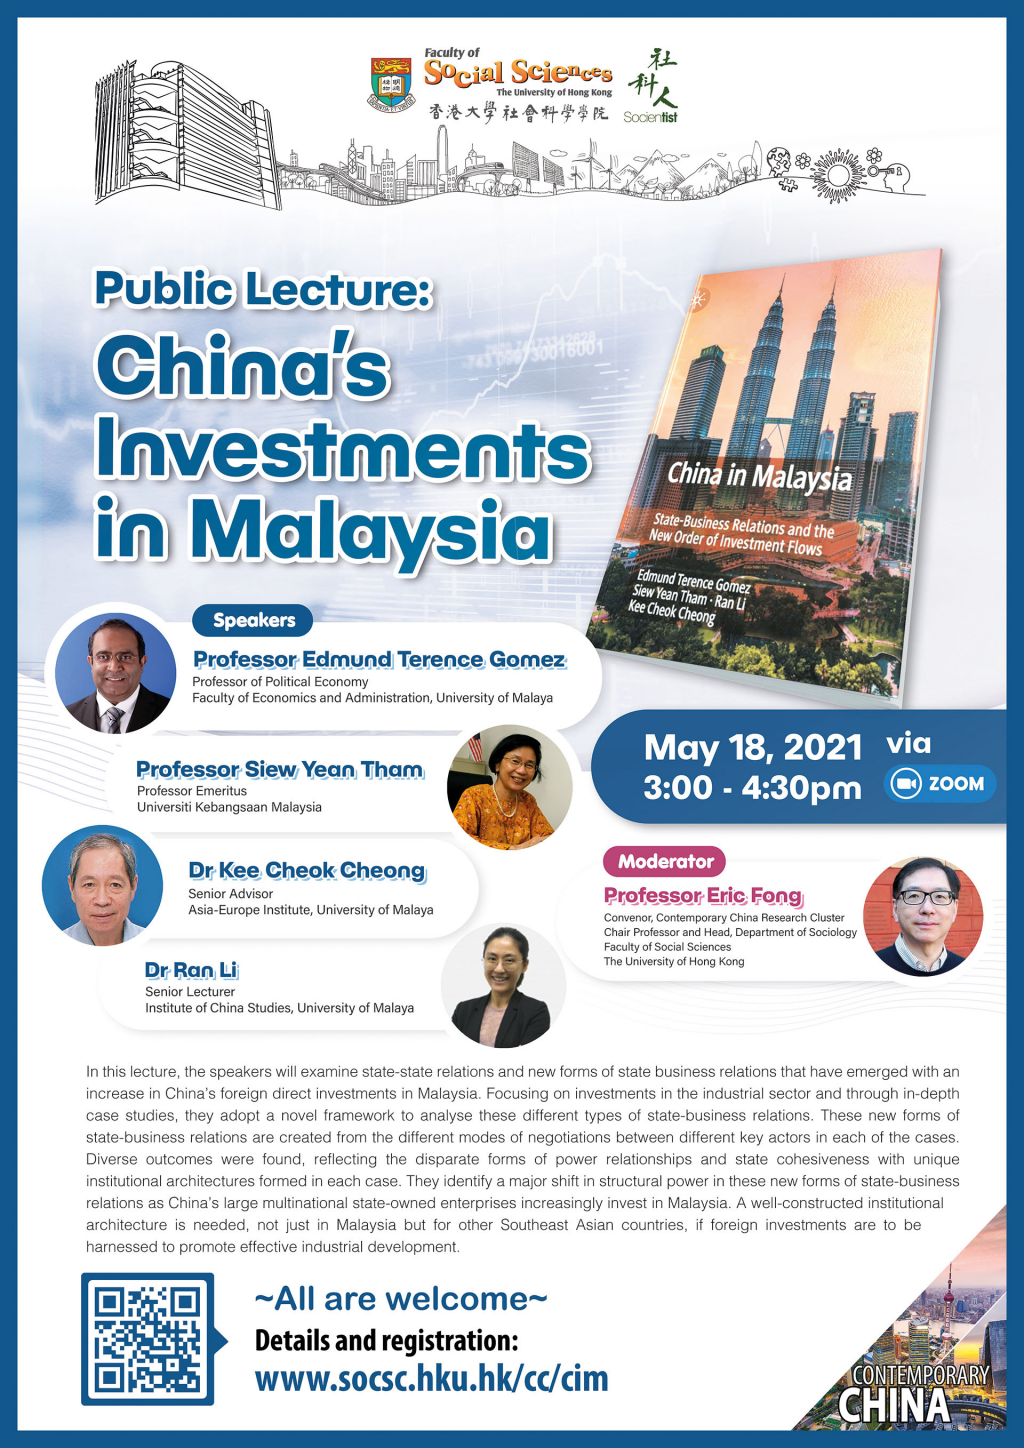 Contemporary China Research Cluster Public Lecture: China's Investments in Malaysia (May 18, 3pm)